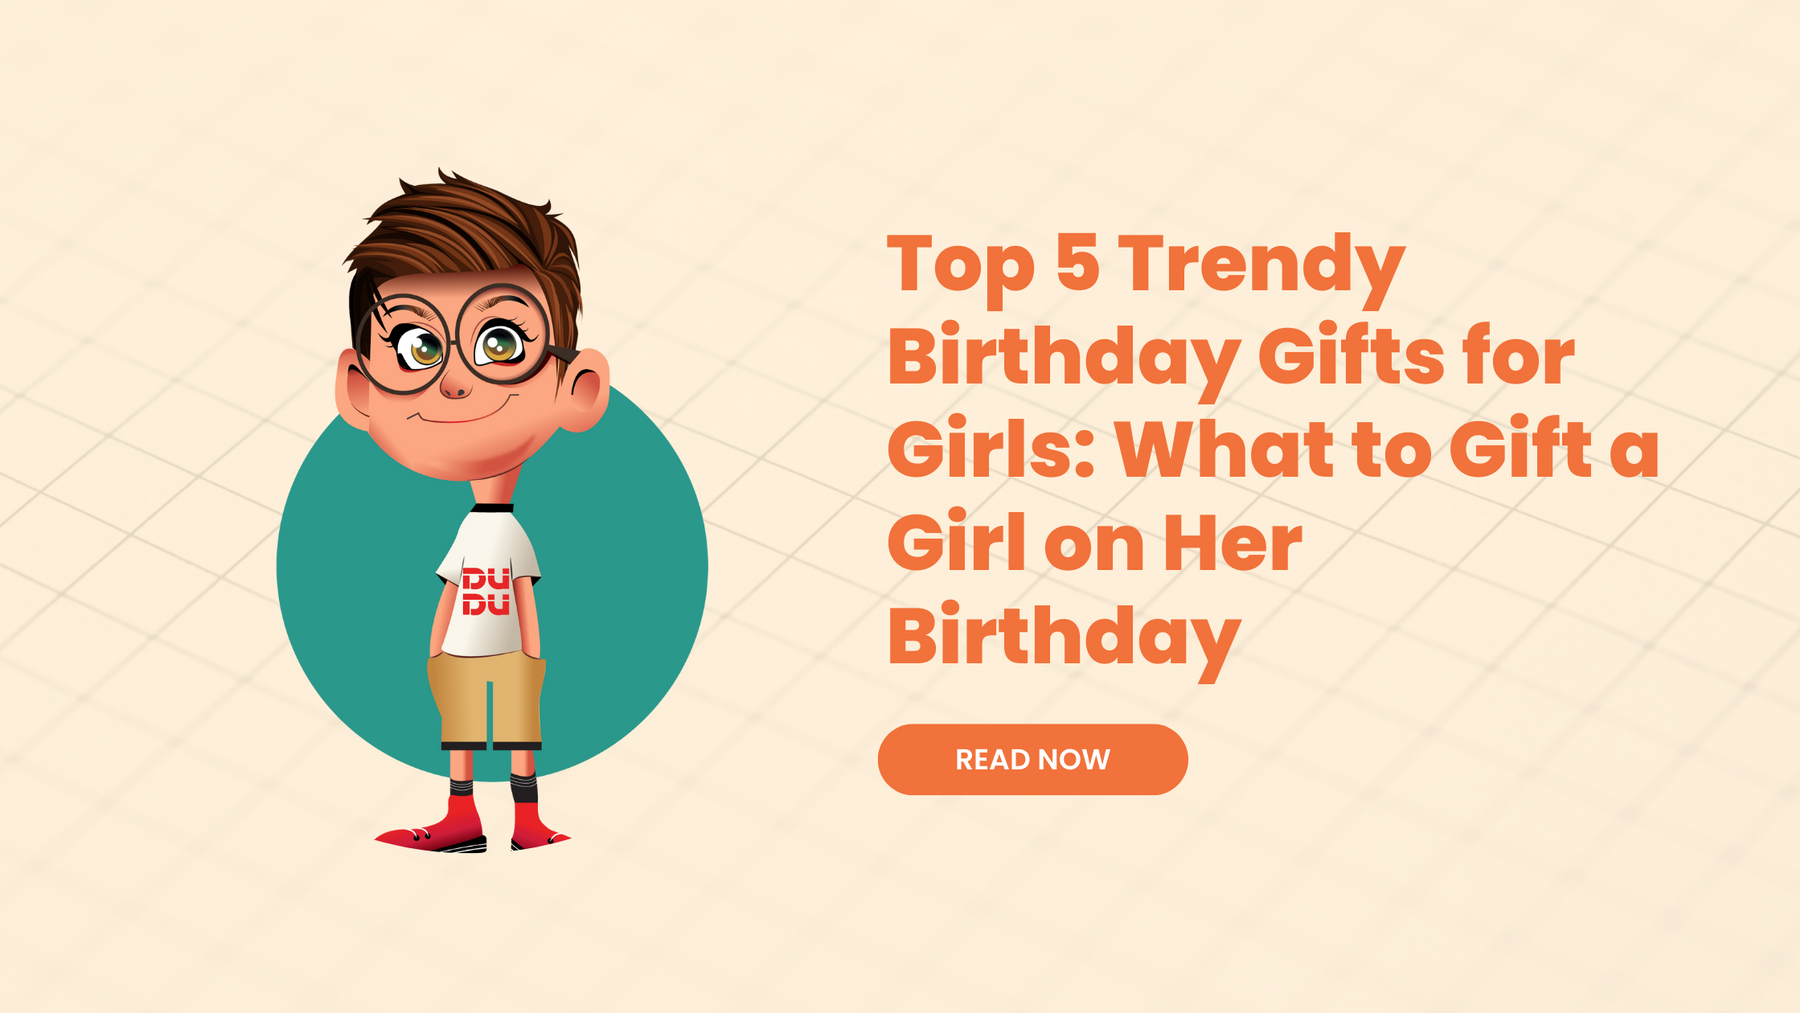 Top 5 Trendy Birthday Gifts for Girls. What to Gift a Girl on Her Birthday